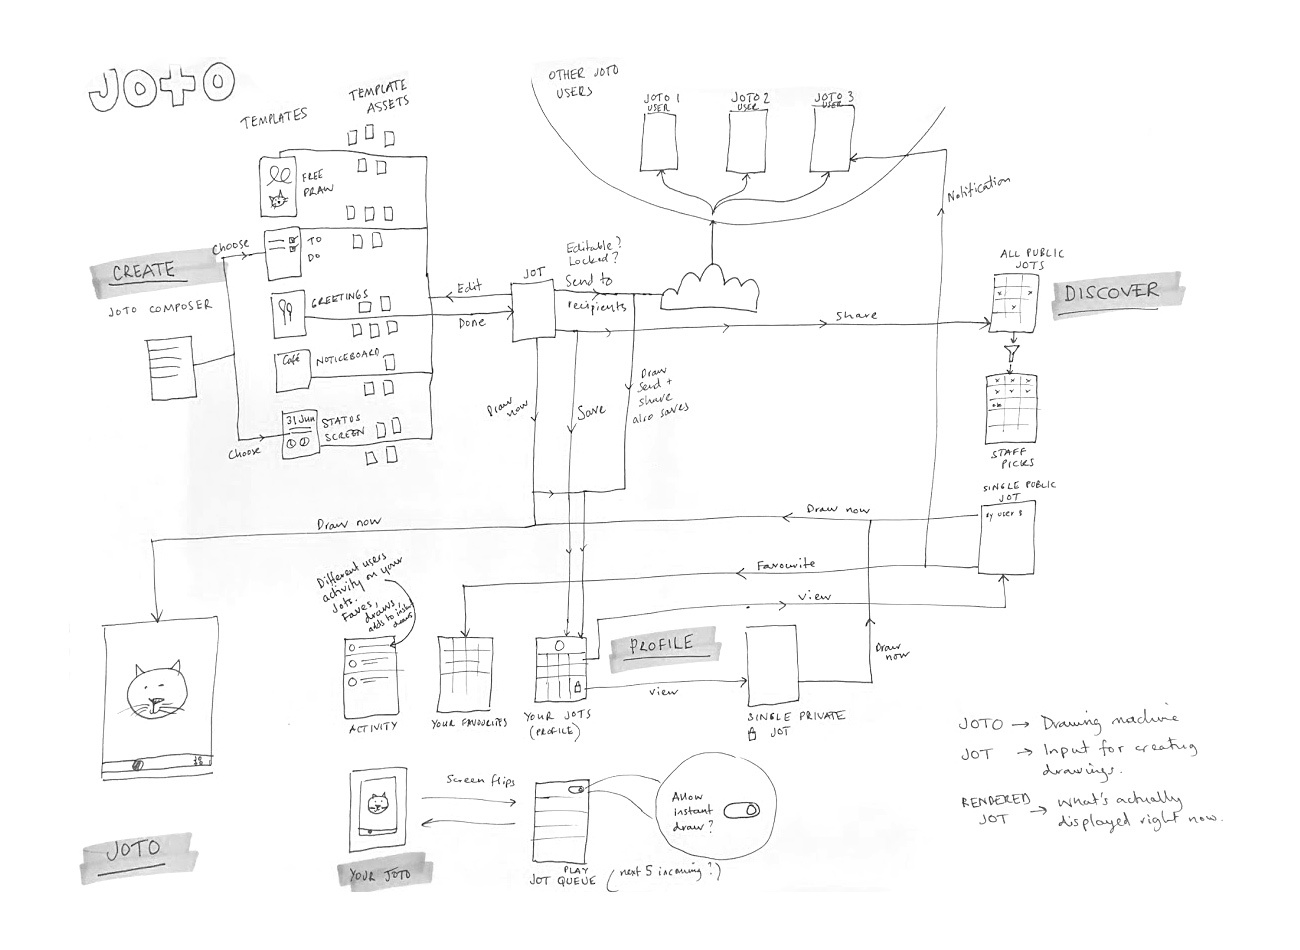 Joto mapping and wireframing